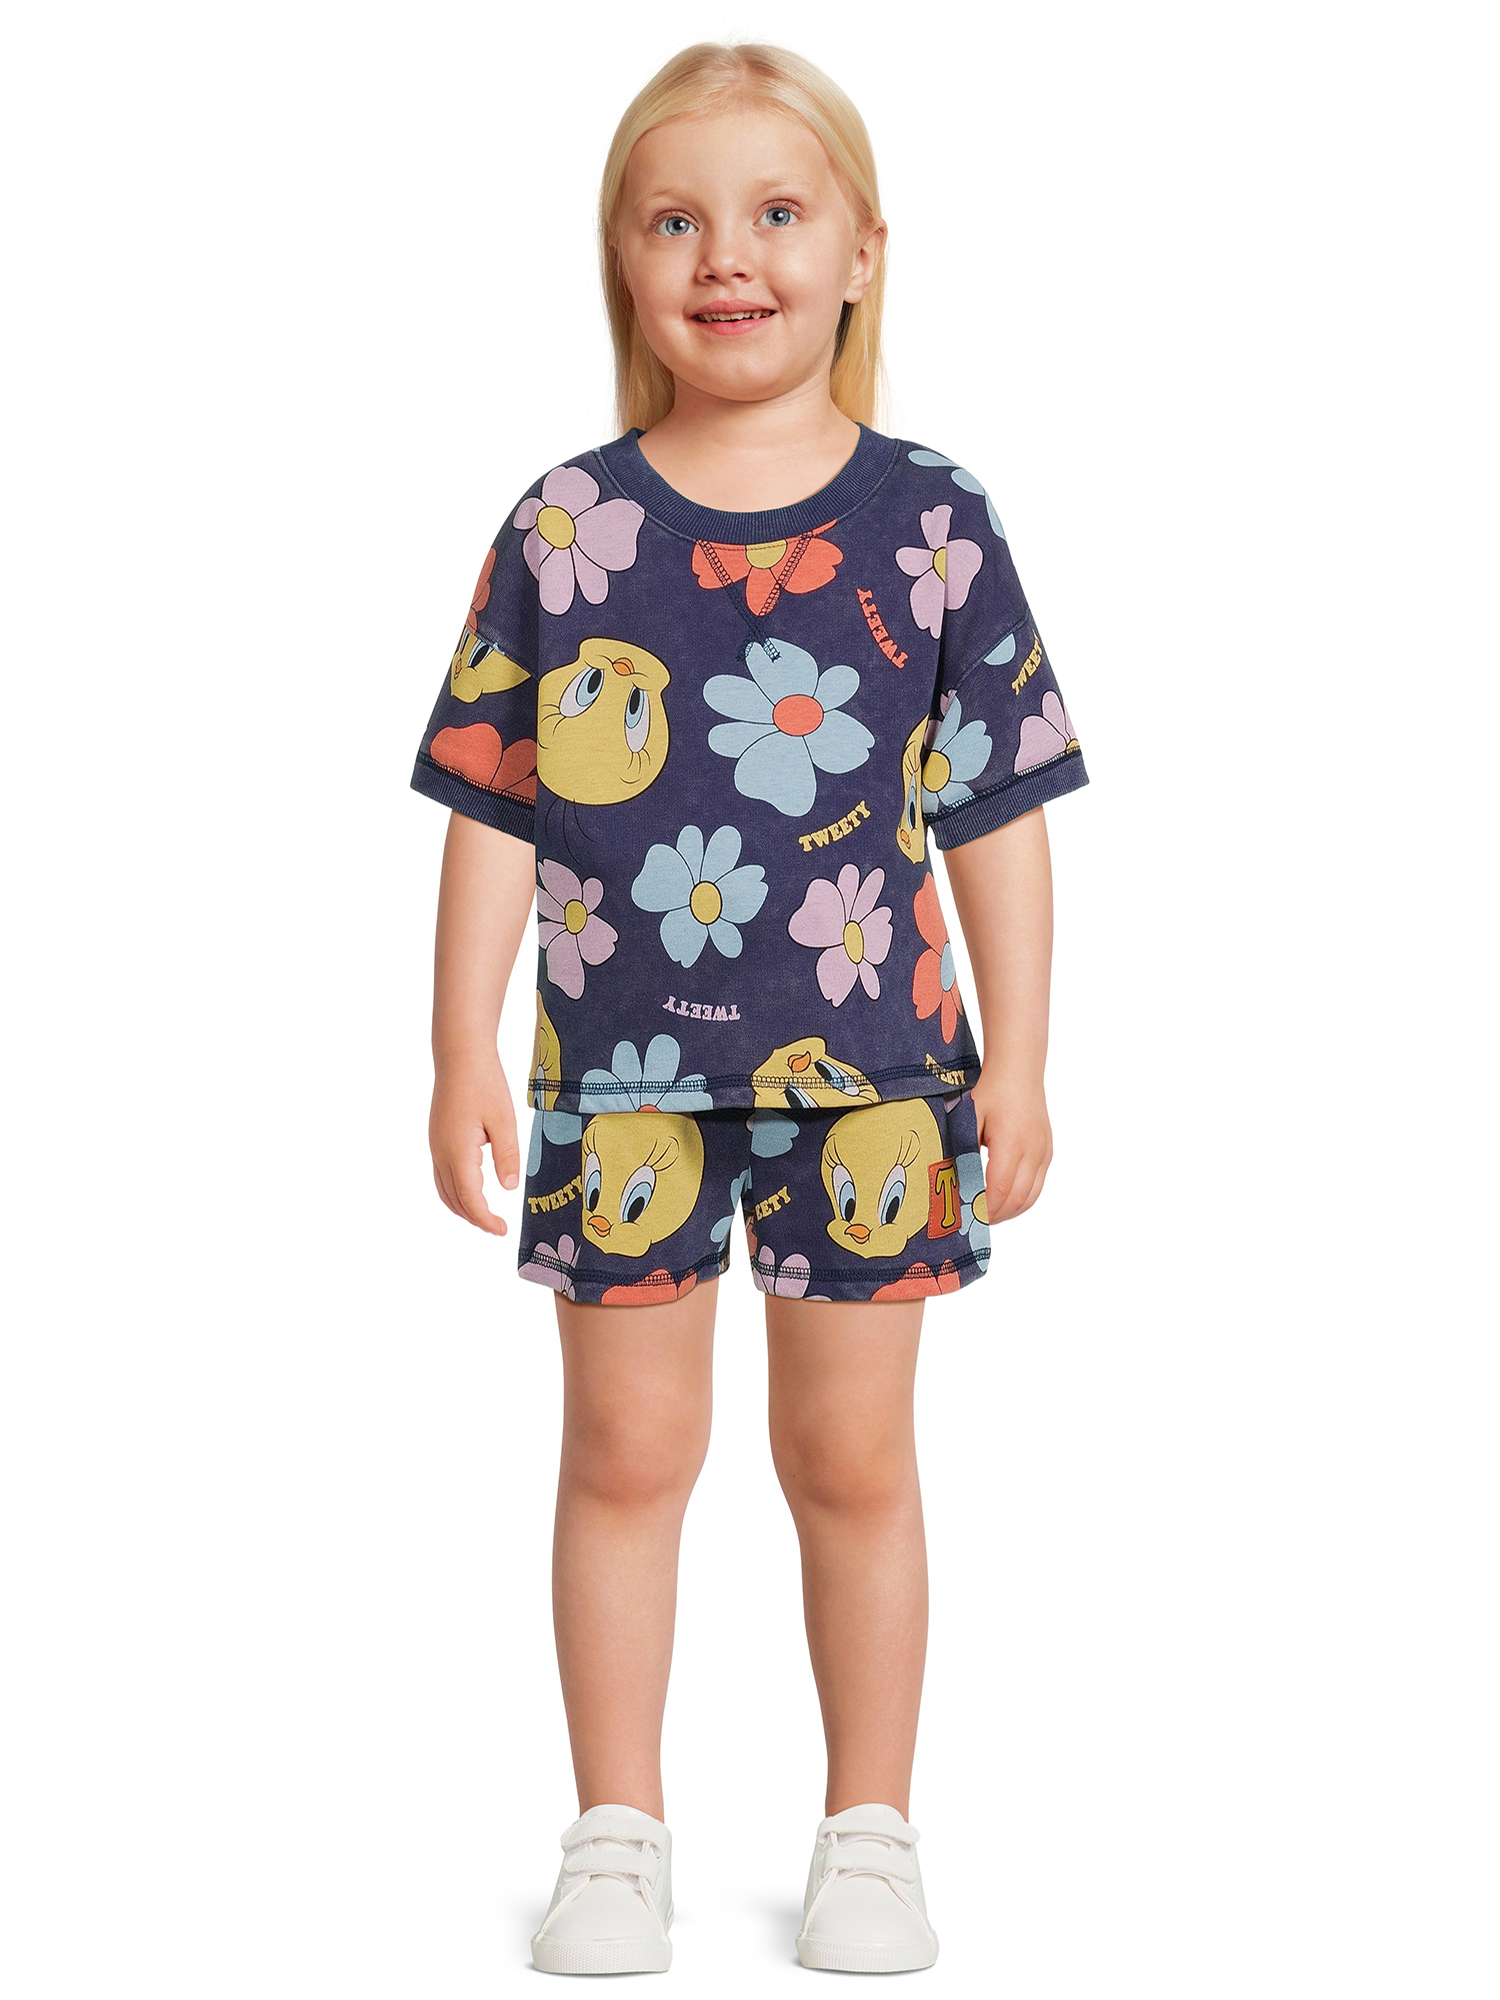 Looney Tunes Toddler Girls Tee and Shorts Set, 2-Piece, Sizes 12M-5T - image 2 of 10